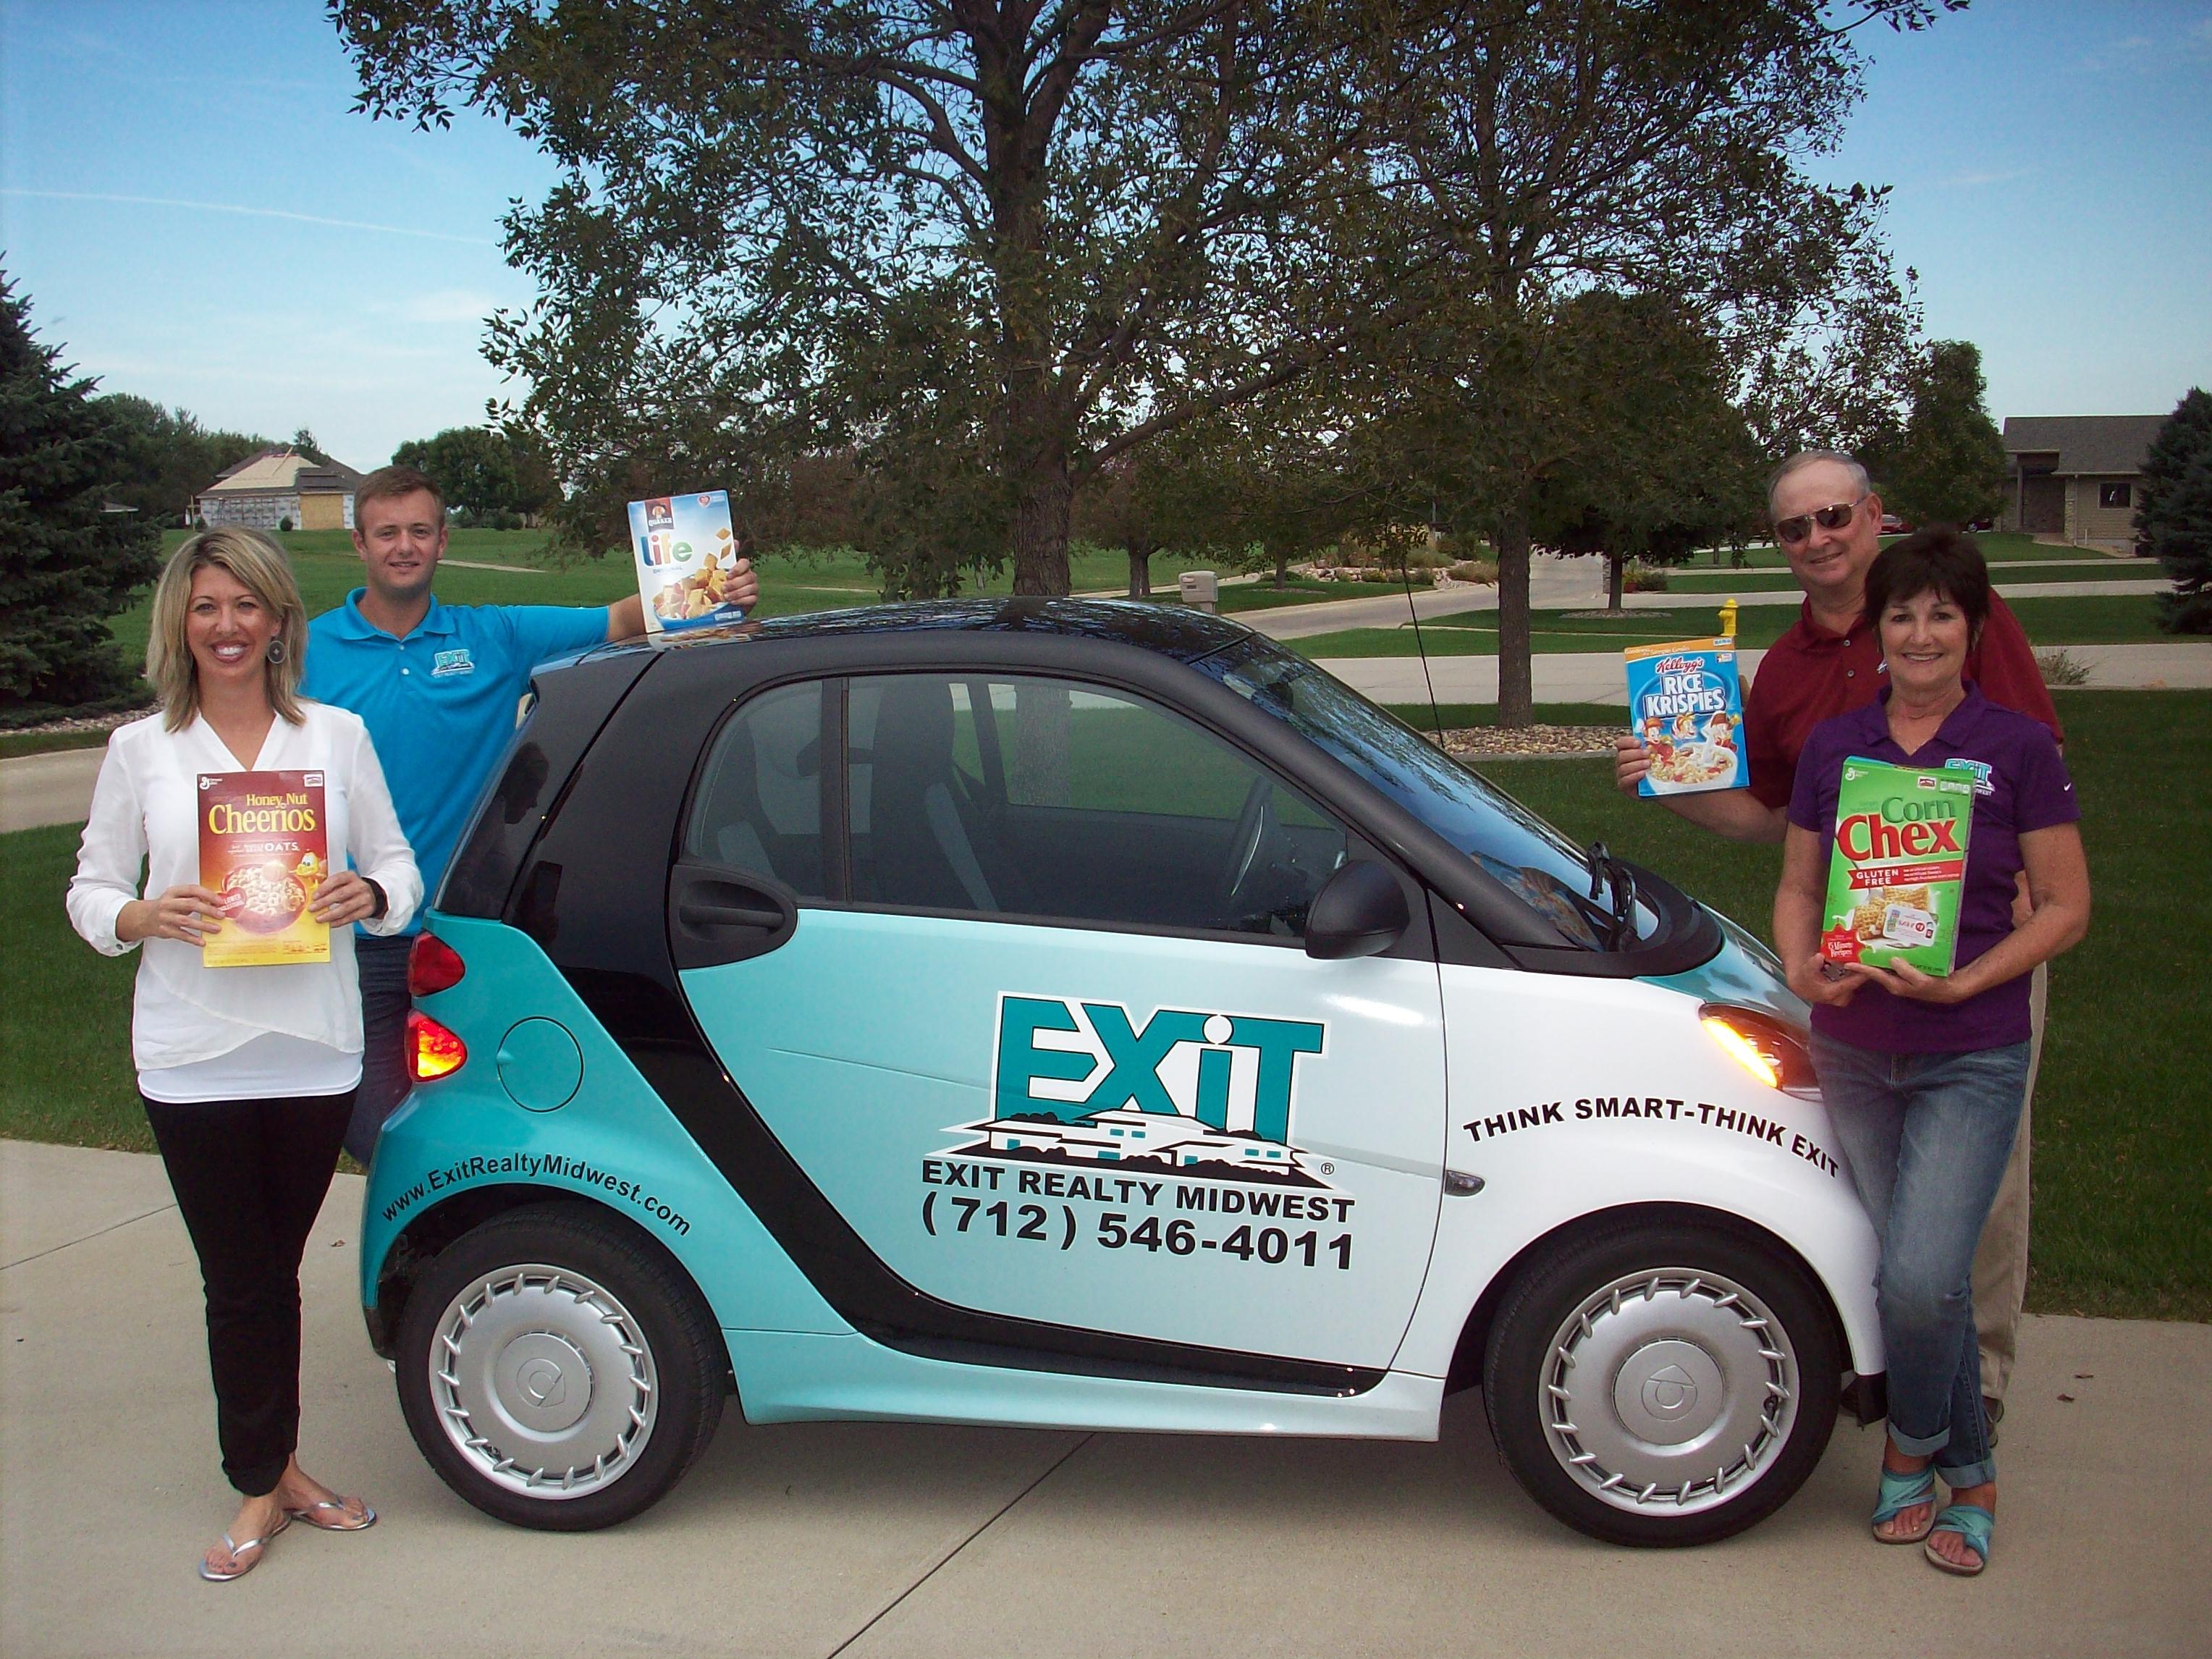 Help us fill our EXIT Smart Car for the Back Pack Program of Le Mars. The agents at EXIT Realty Midwest (Misty Szczech, Austin Sitzmann, Dave Klohs and Jan Wagner) in Le Mars will be taking donations on Thursday evening (Sept. 17). We will be parked in the Fareway parking lot from 4-6:30 pm. Stop by and drop a box of cereal in our Smart Car and fill it up for the Le Mars Back Pack Program.